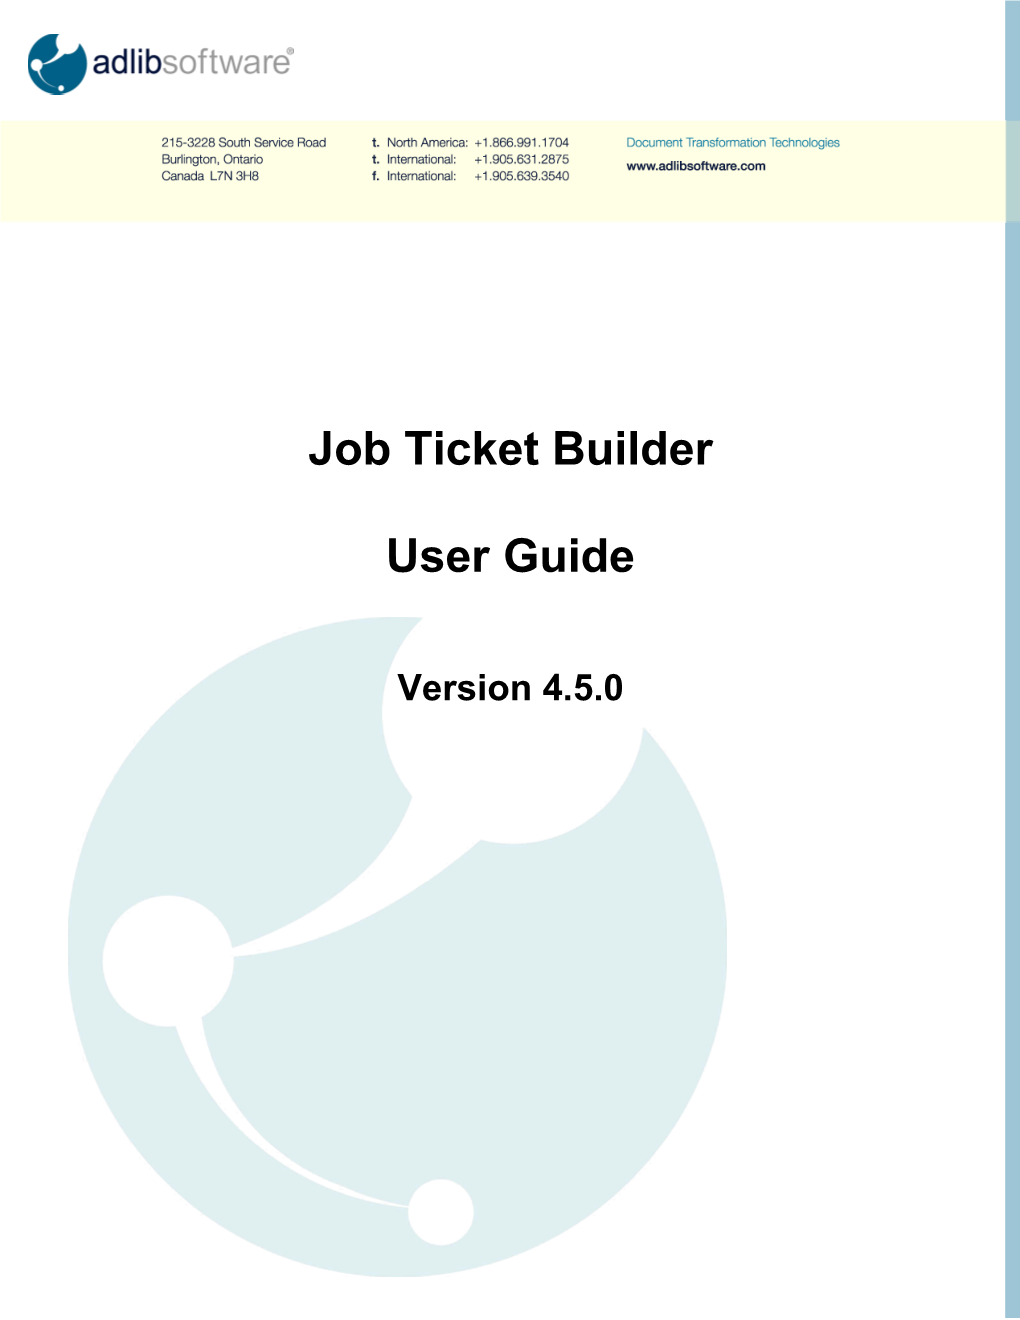 Job Ticket Builder User Guide Page 2 of 11 Version 4.5.0 Table of Contents